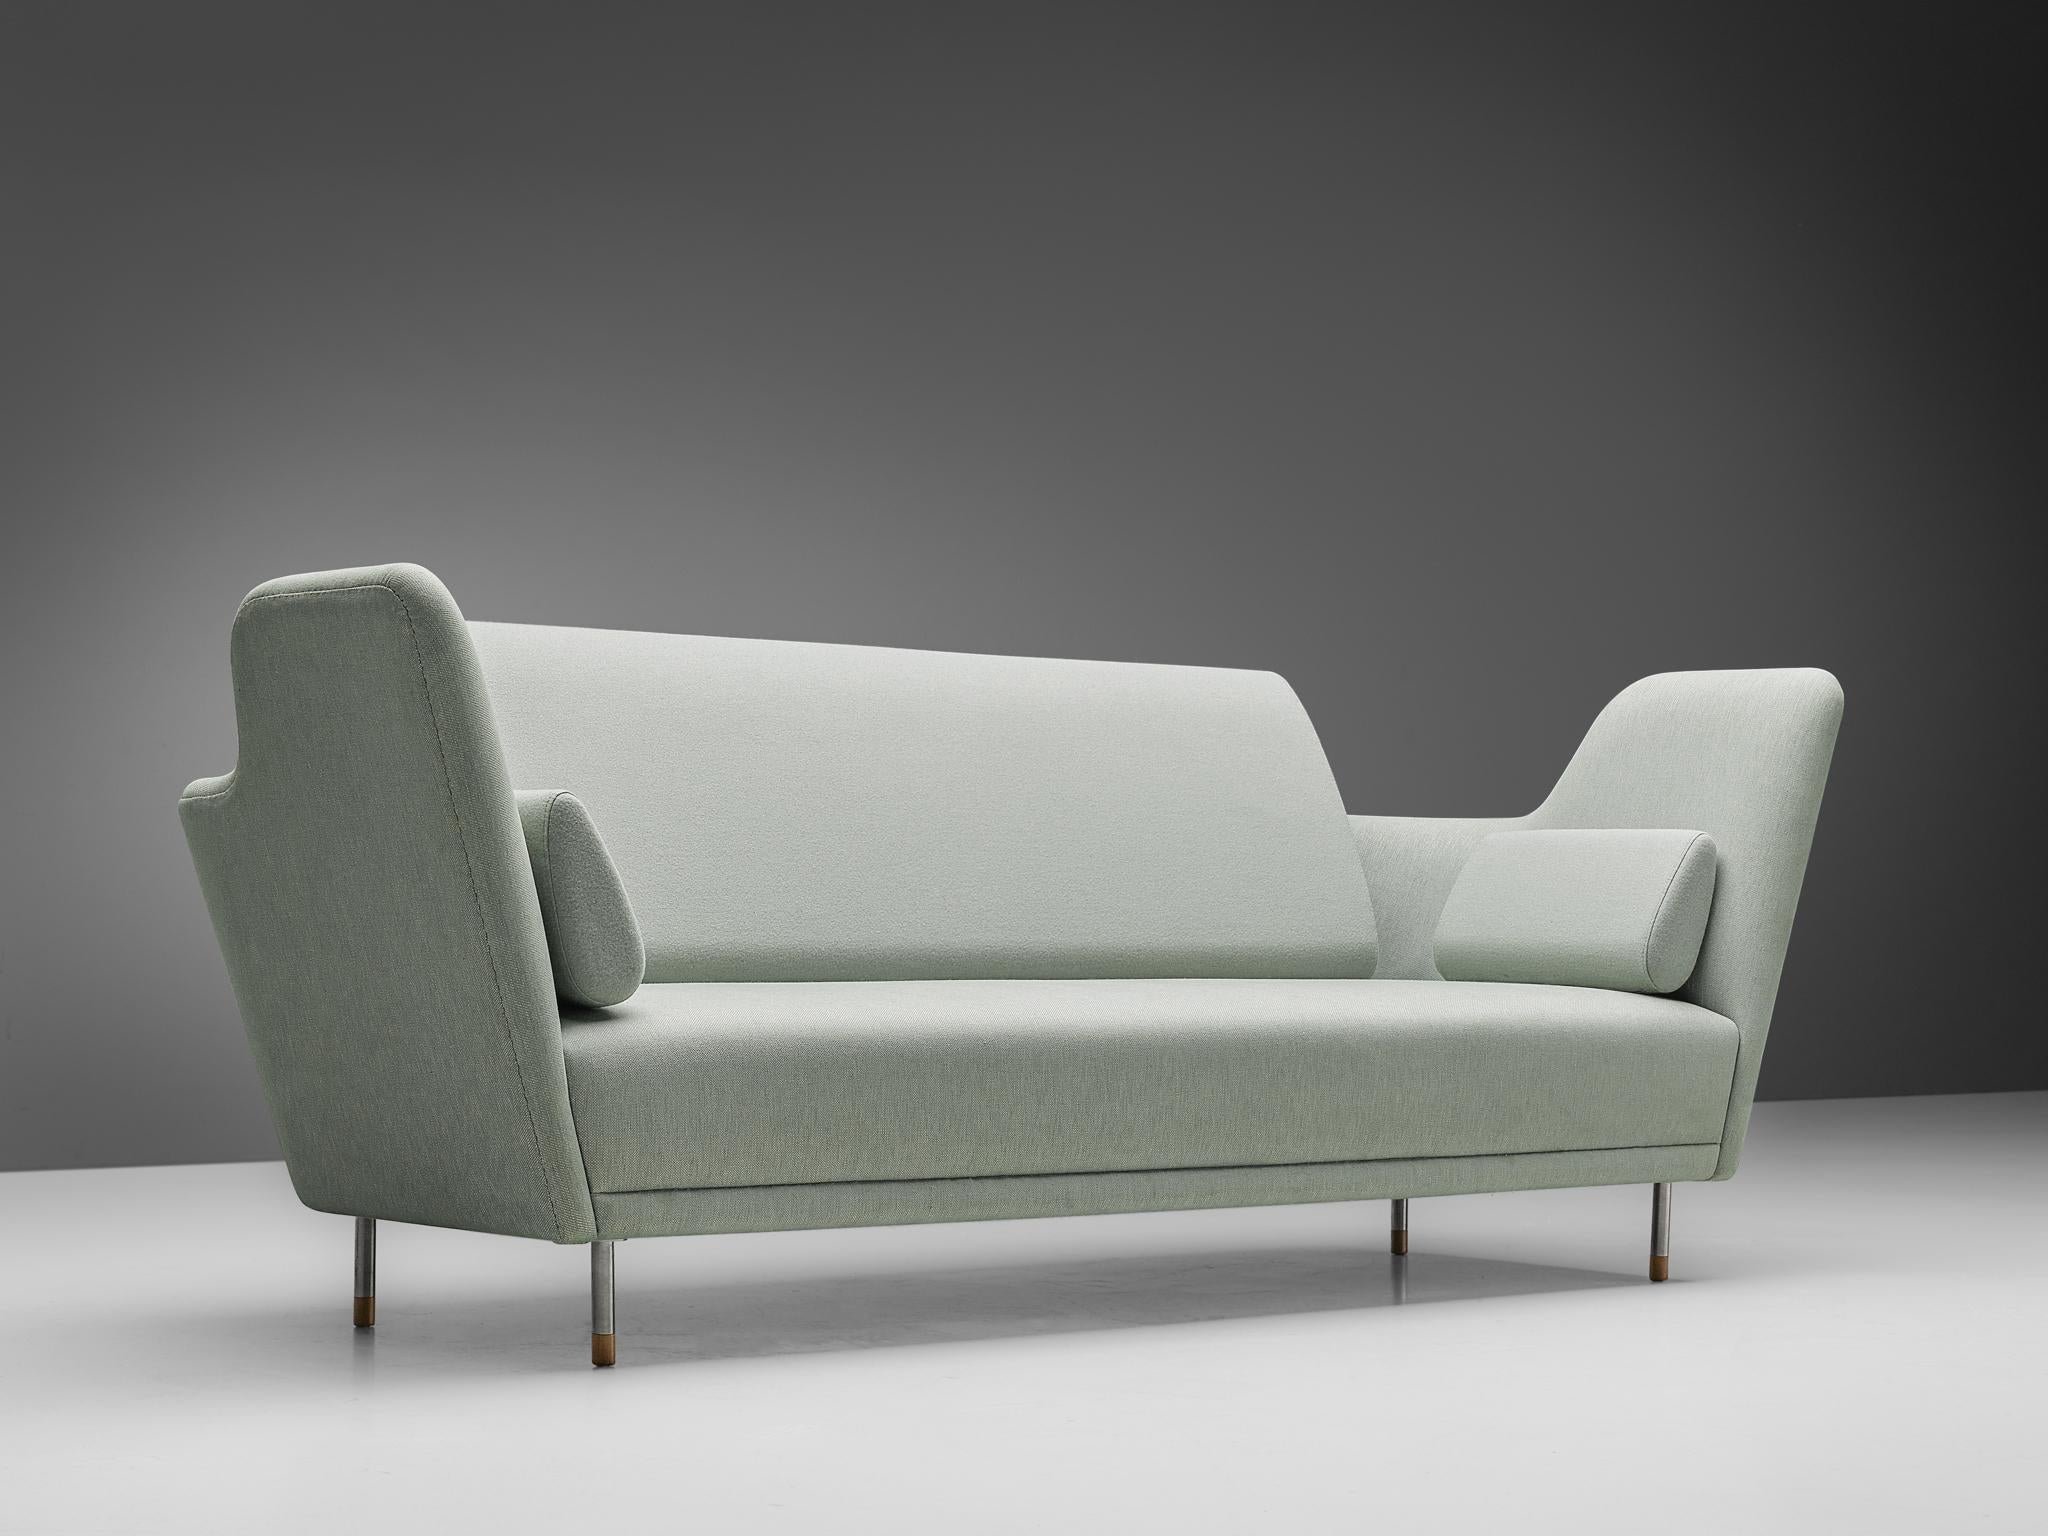 Finn Juhl, sofa model '57', fabric, steel, teak, leather, Denmark, design 1957, later production

An extraordinary sofa designed by Finn Juhl. The sofa was exhibited for the very first time in the Tivoli Gardens in Copenhagen during 1957. The